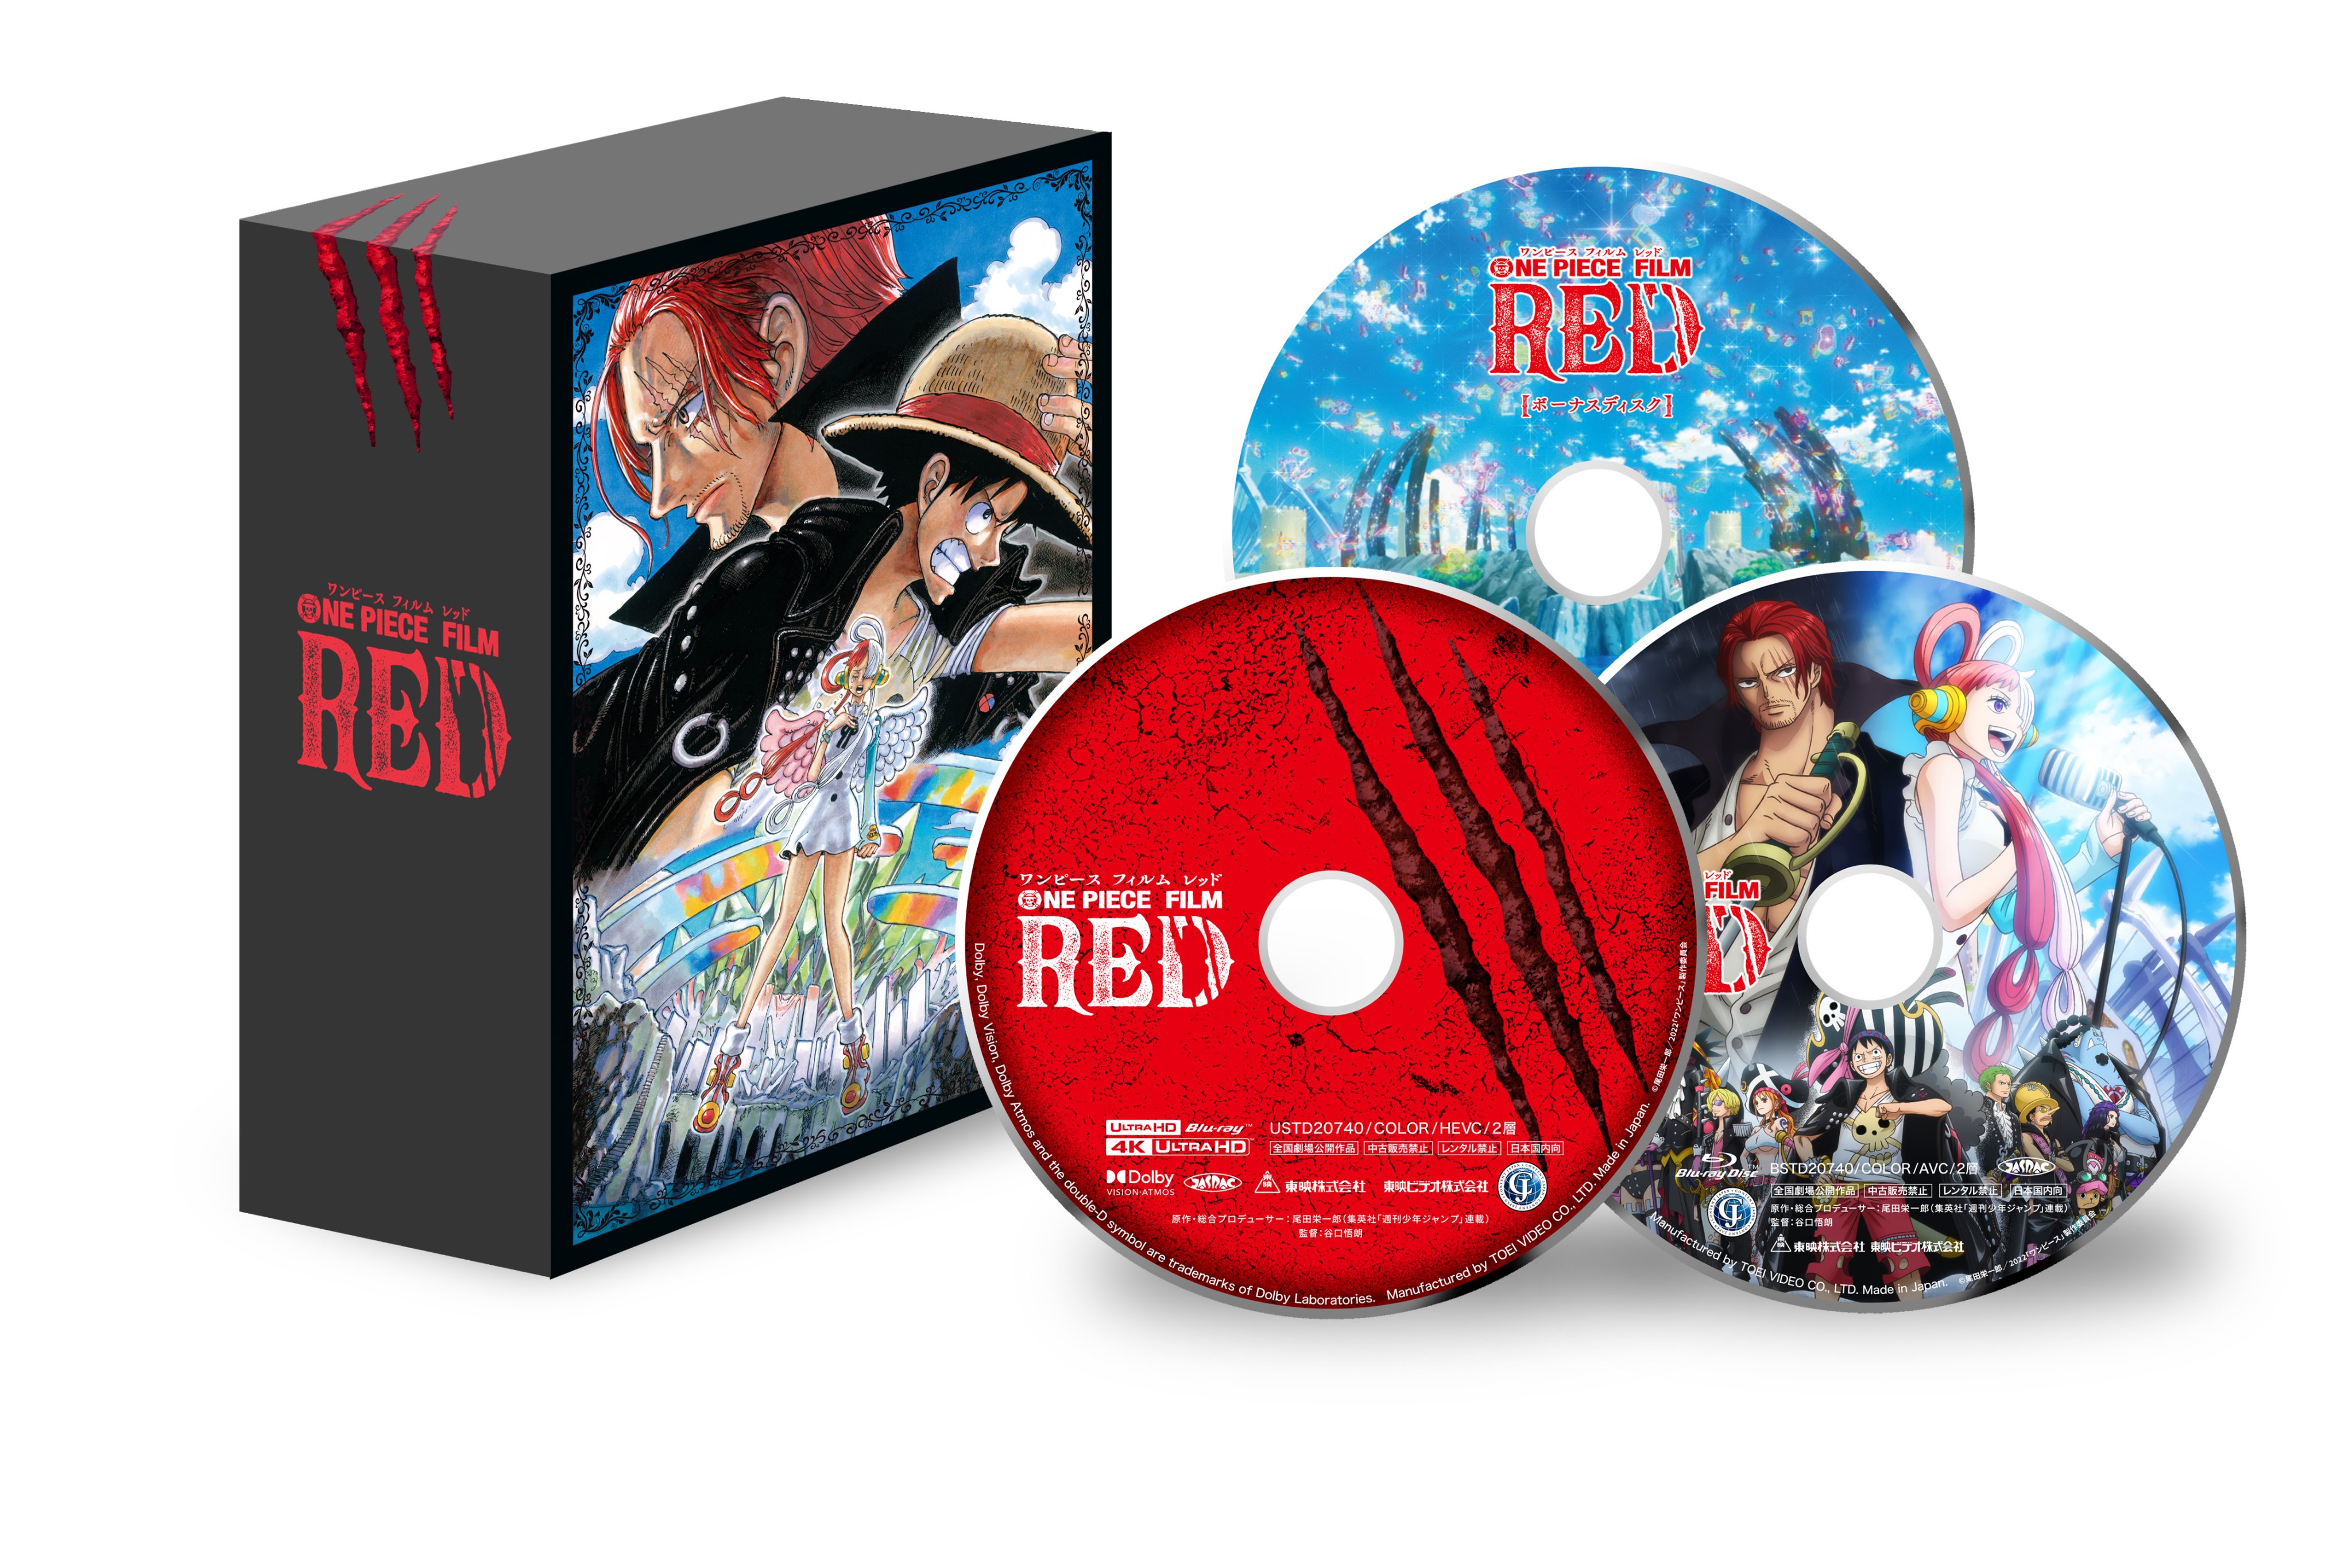 One Piece - Now available for pre-order on the Crunchyroll Store: One Piece  Film Red on Blu-ray! Reserve yours now! 🔥🏴‍☠️ GET